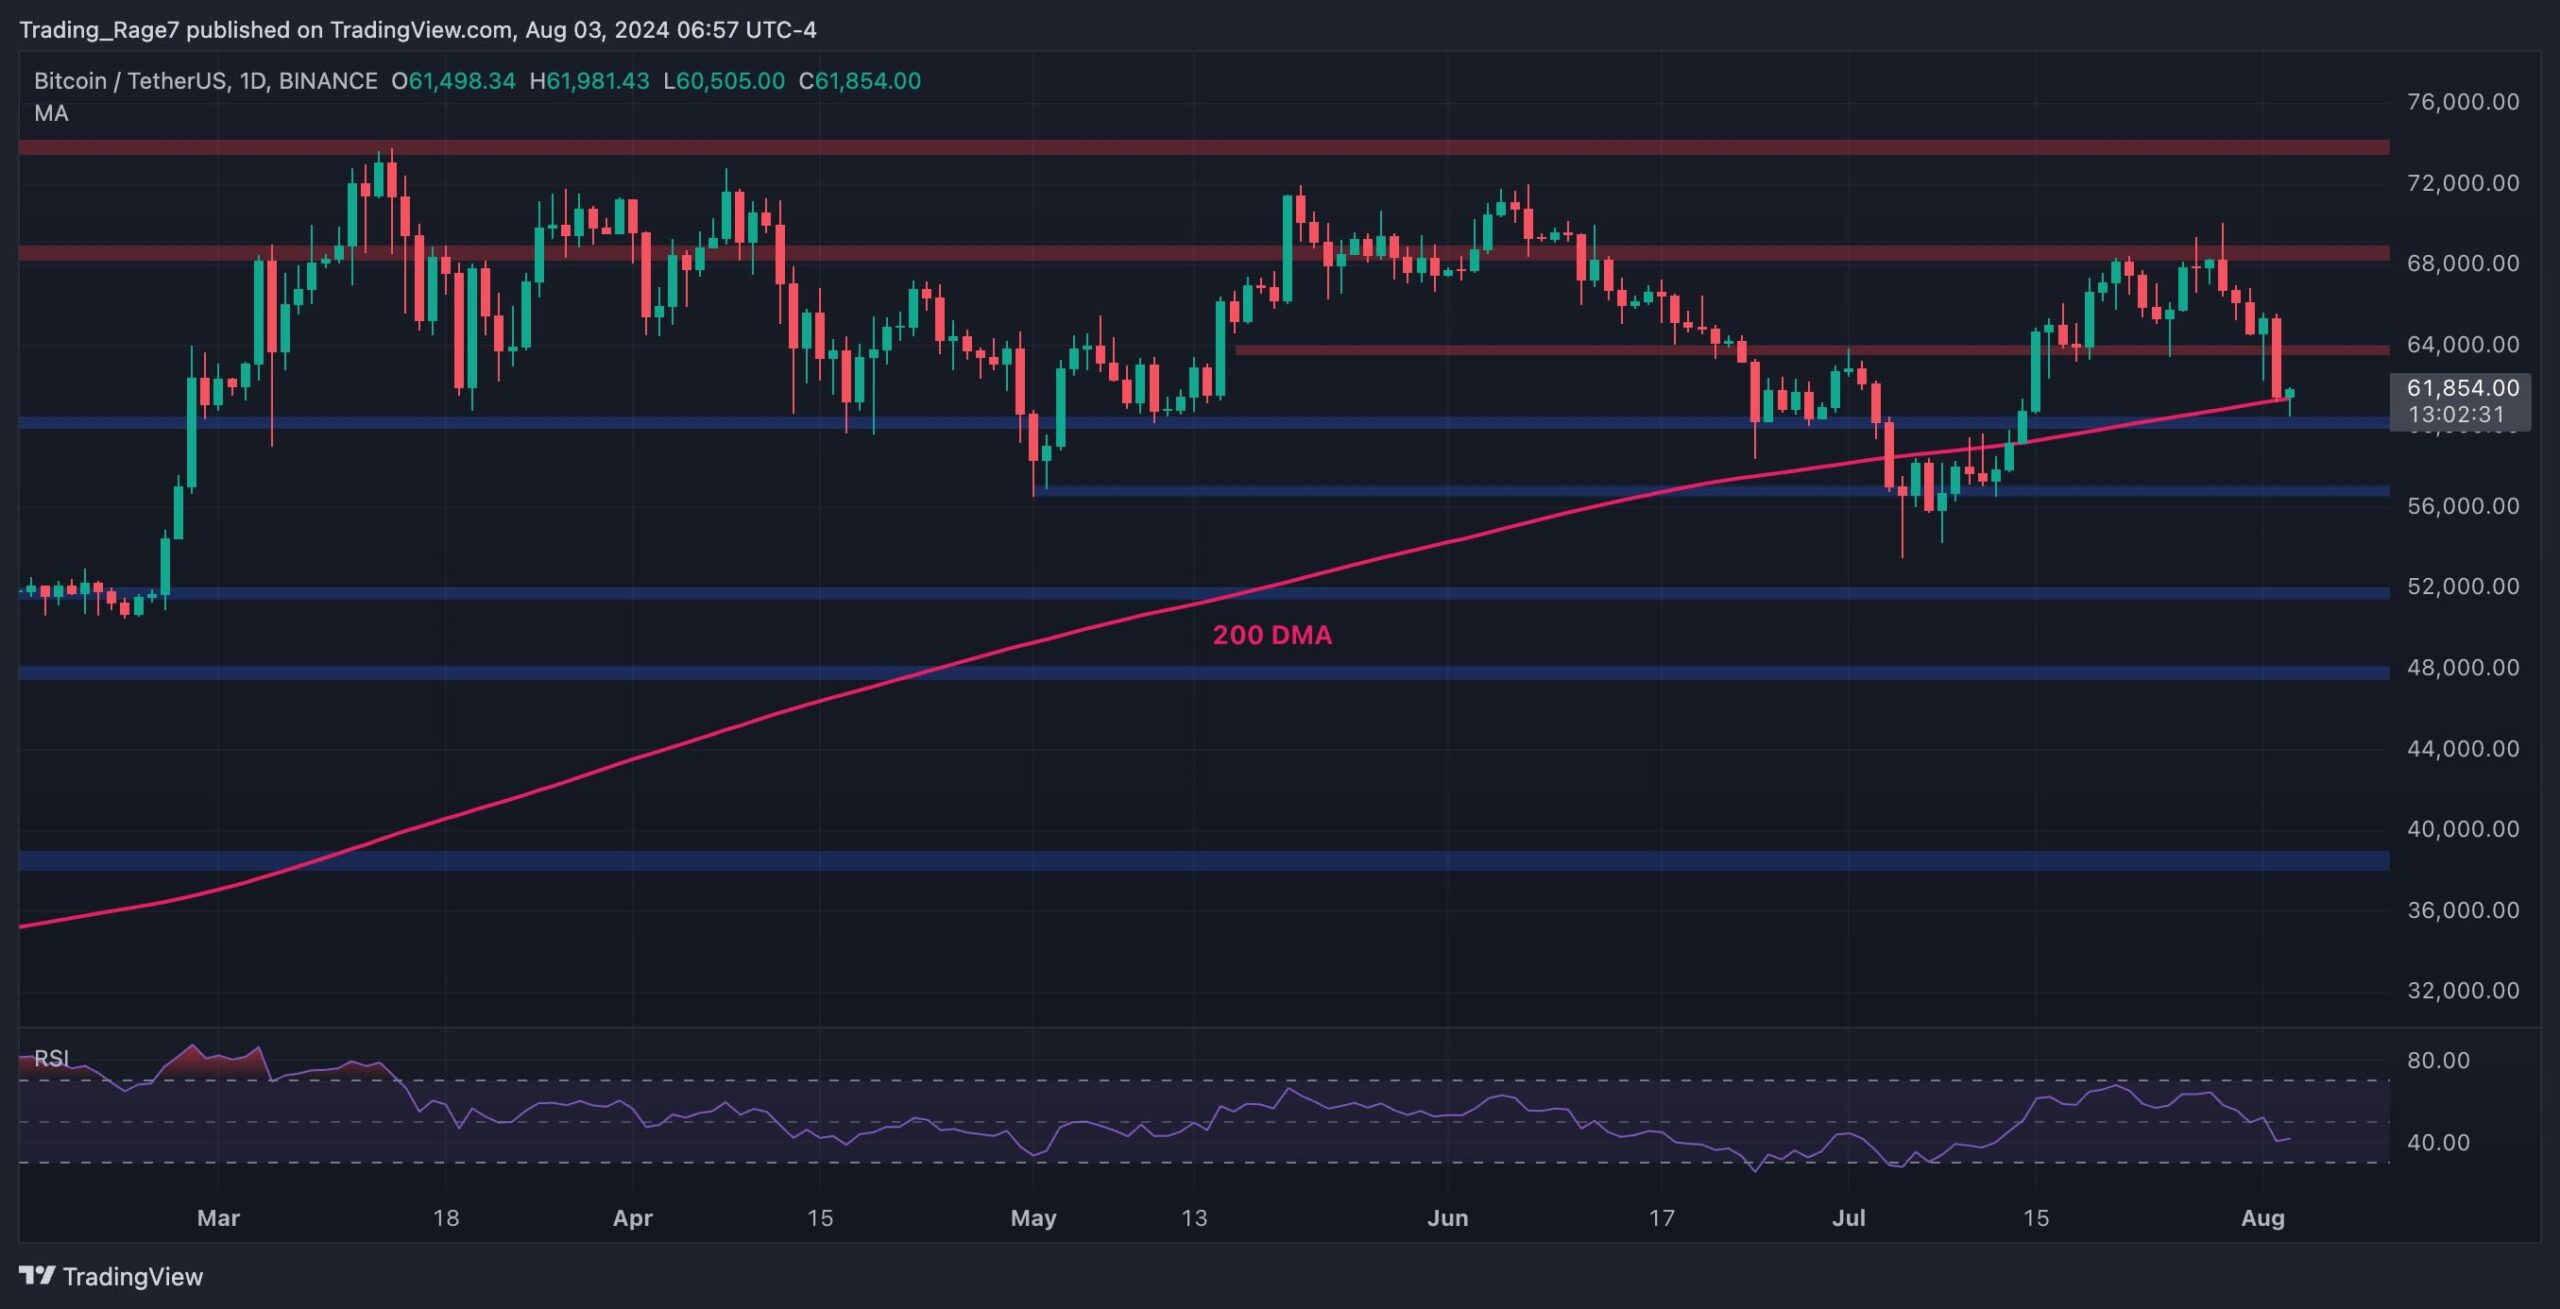 Bitcoin Price Analysis: Following a 10% Weekly Crash, What’s Next for BTC?